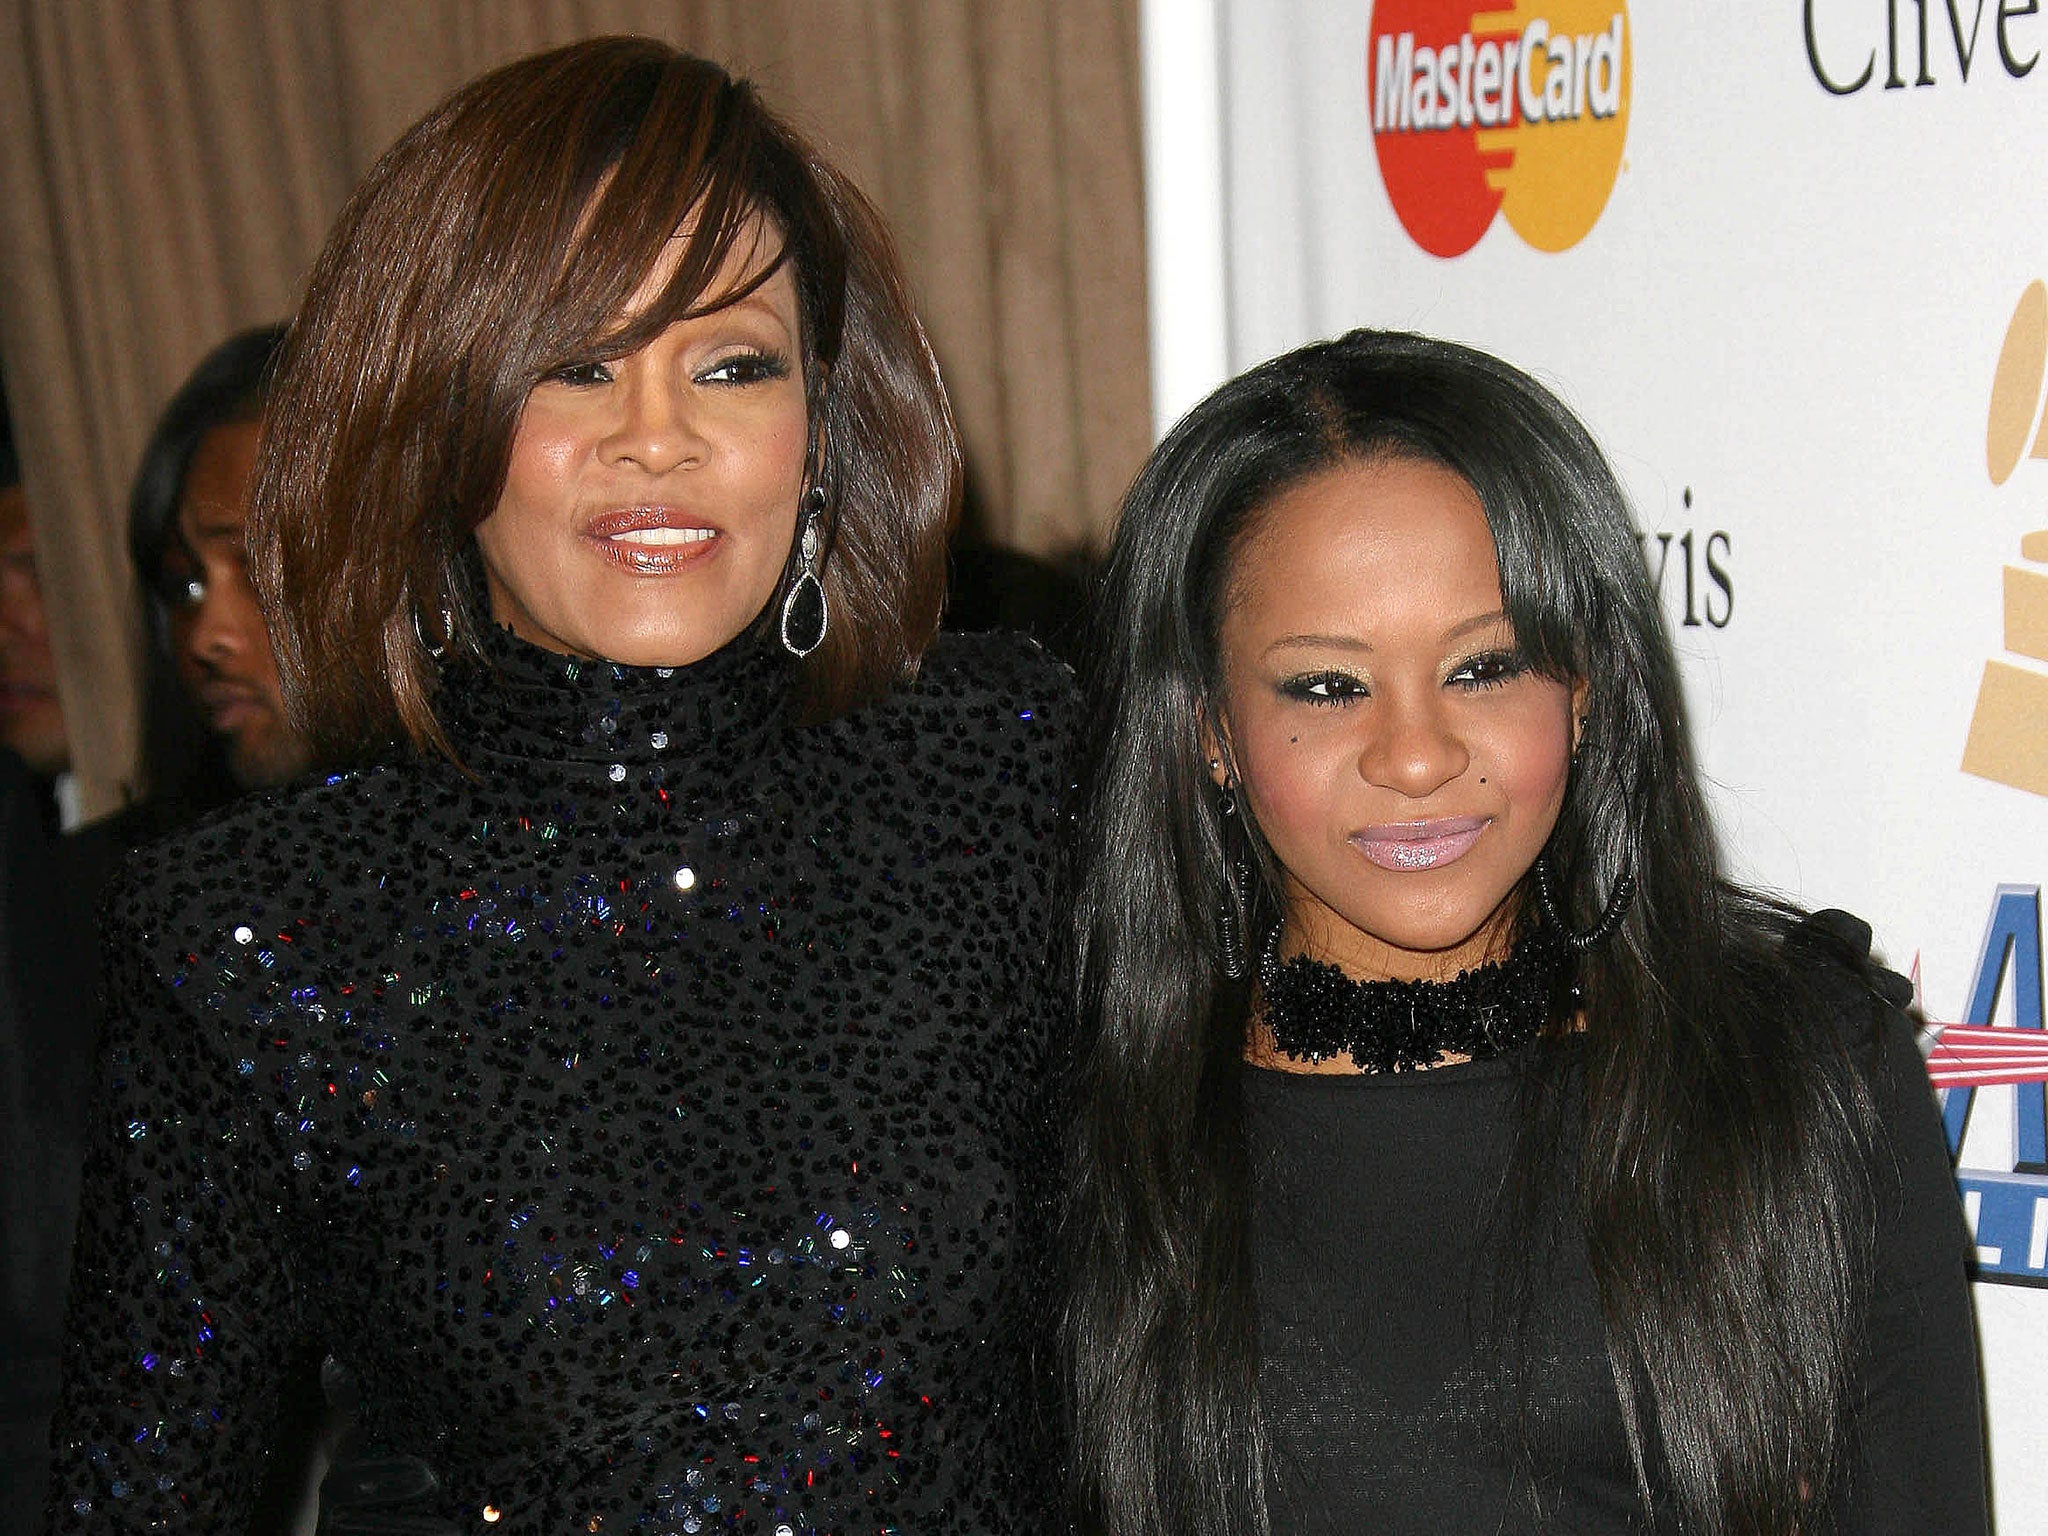 Bobbi Kristina Brown with her mother Whitney Houston in 2011